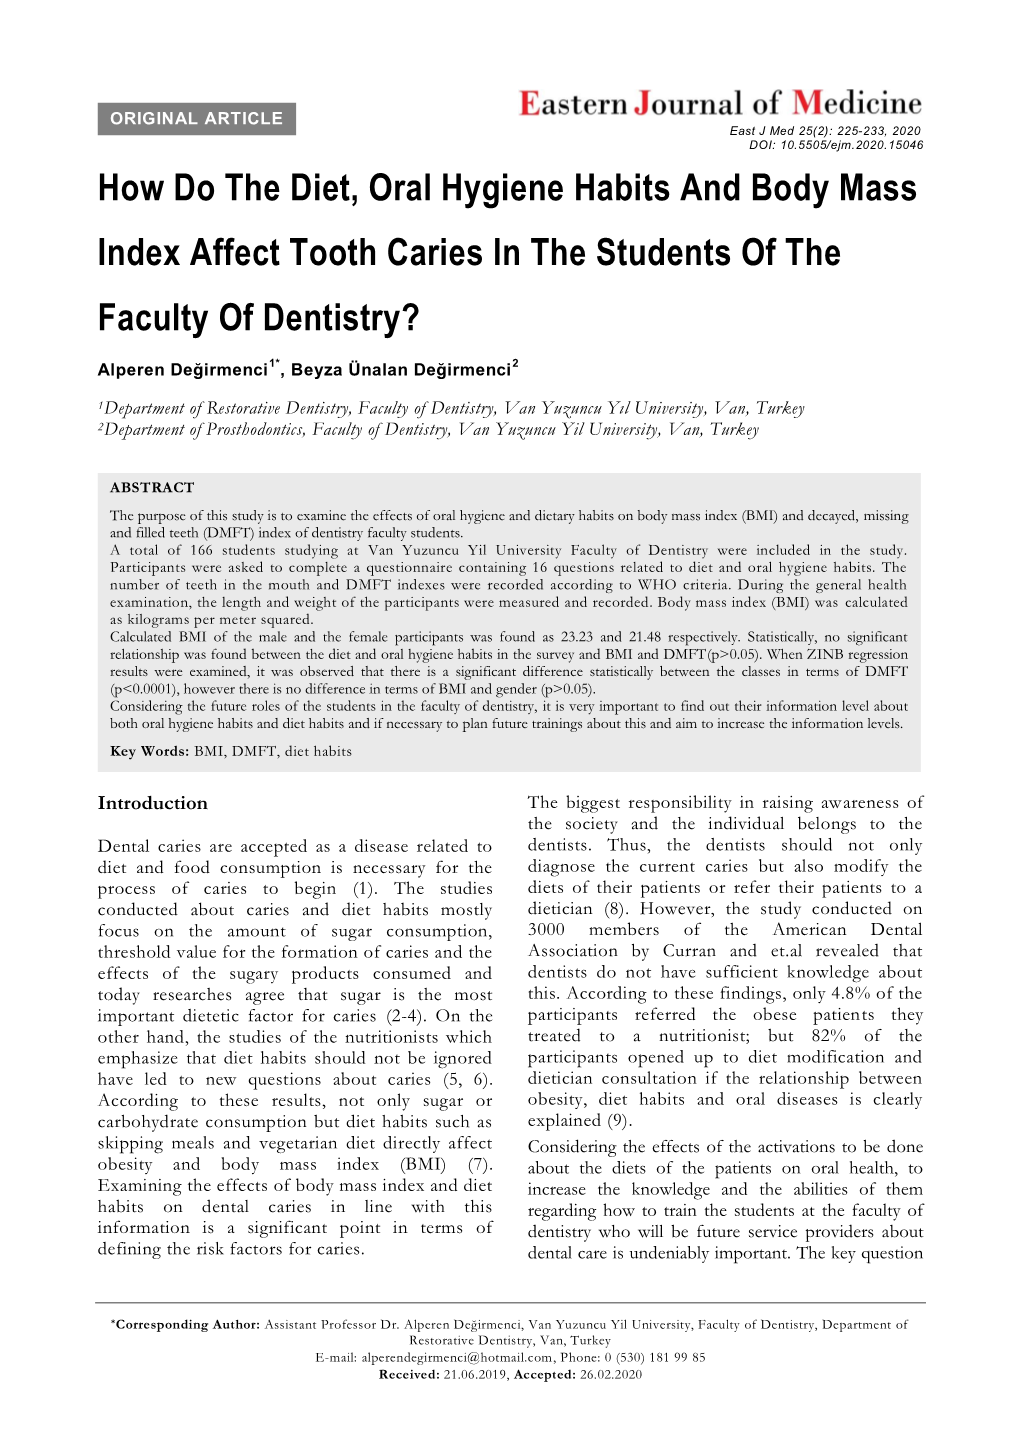 How Do the Diet, Oral Hygiene Habits and Body Mass Index Affect Tooth Caries in the Students of the Faculty of Dentistry?